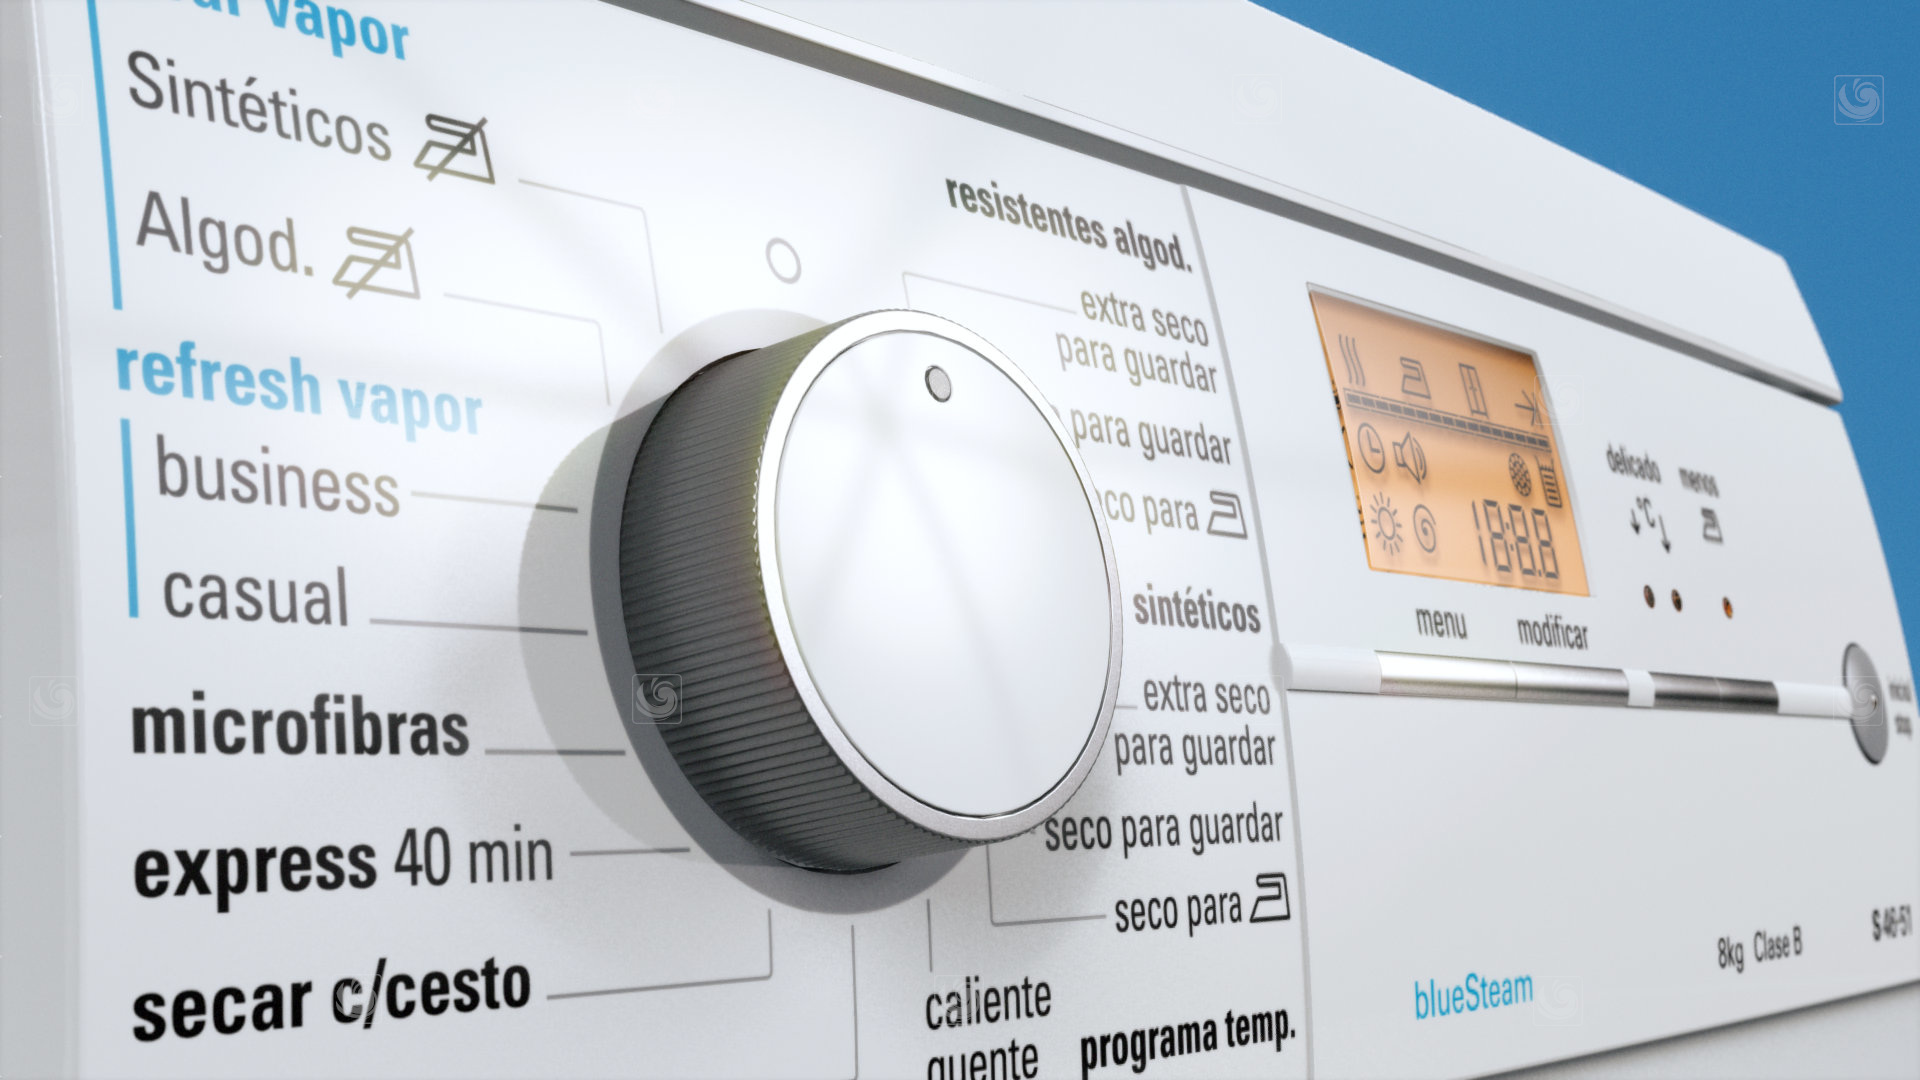 3D animation frame showing details of the controls of a Siemens dryer